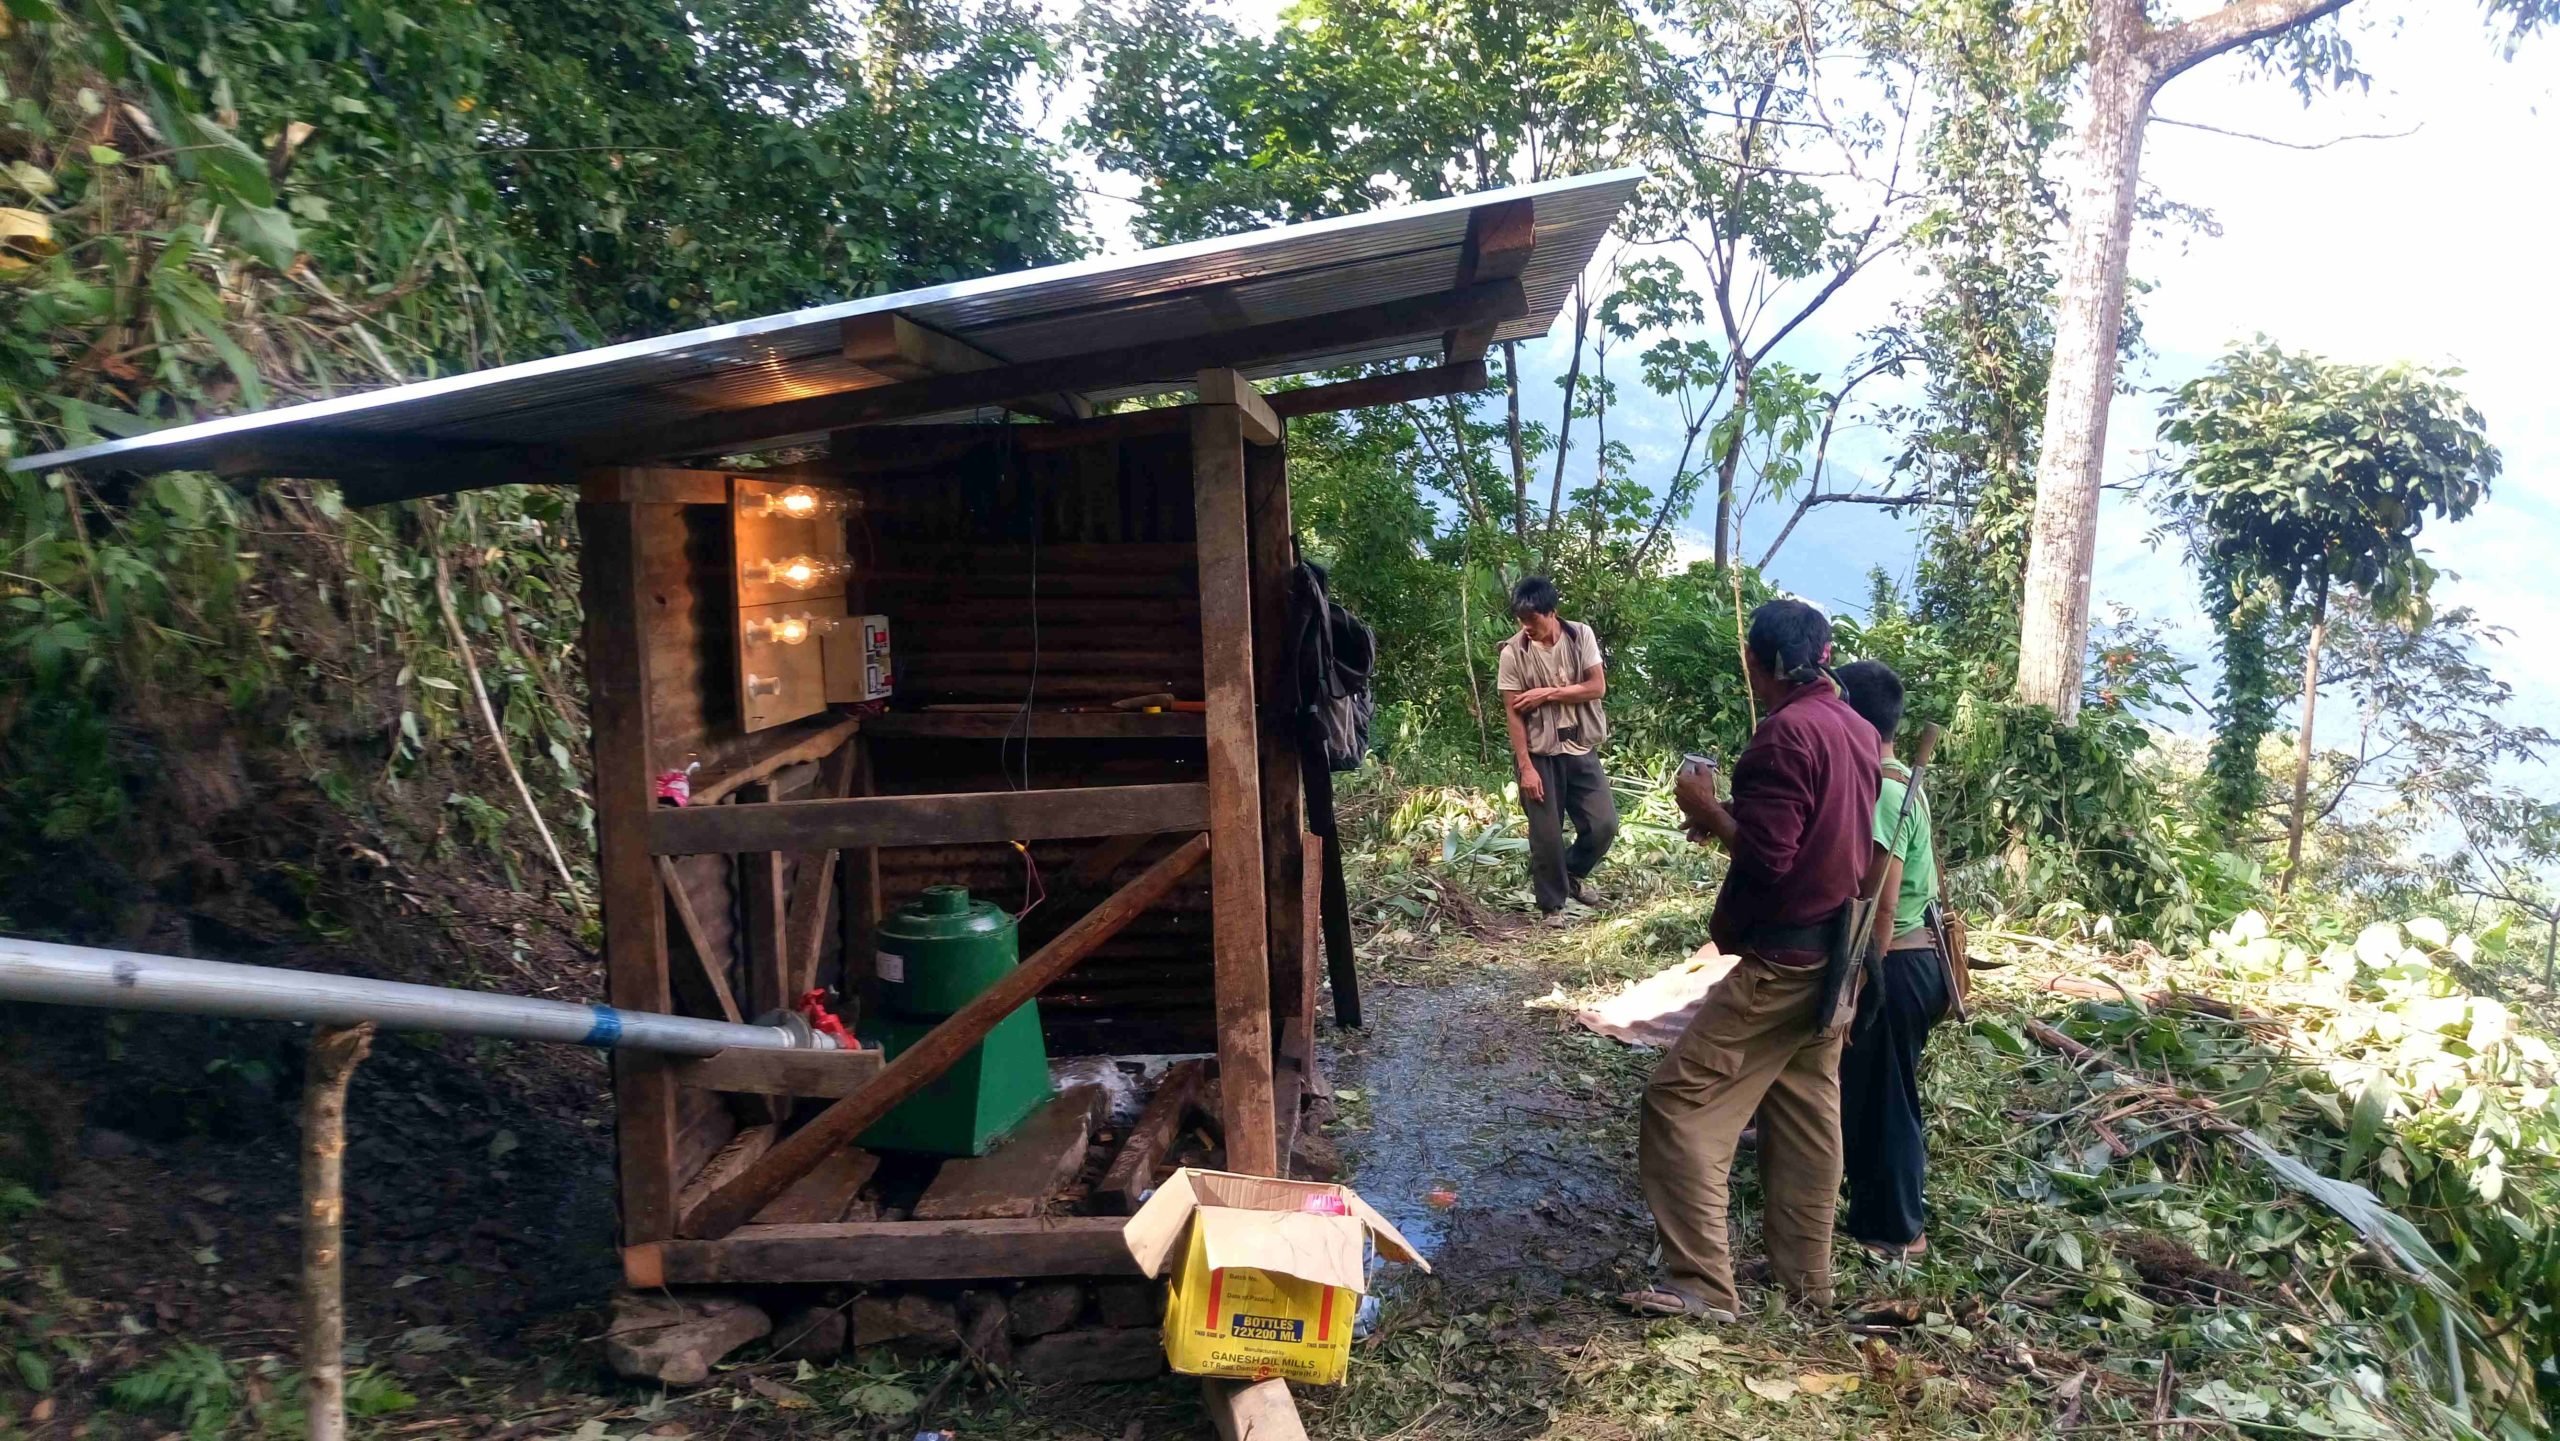 Sites with good gravity flow are identified for installing hydrogers (Image: Yanger Imchen / Nagaland Empowerment of People through Energy Development)